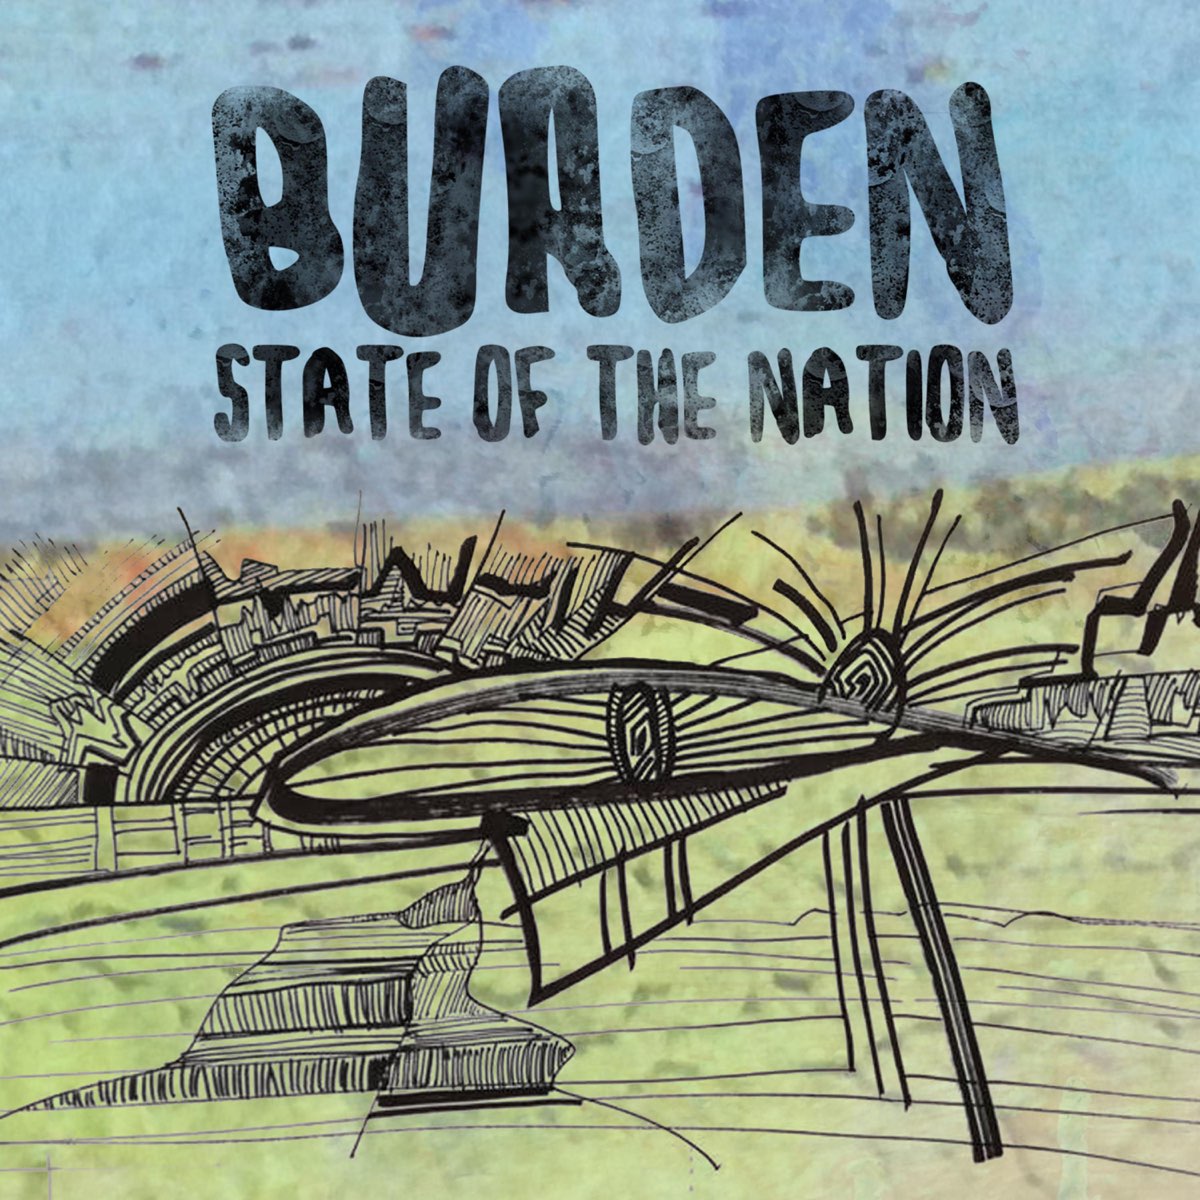 Burden to the State. Burden. New order State of the Nation Single. Burden with you.